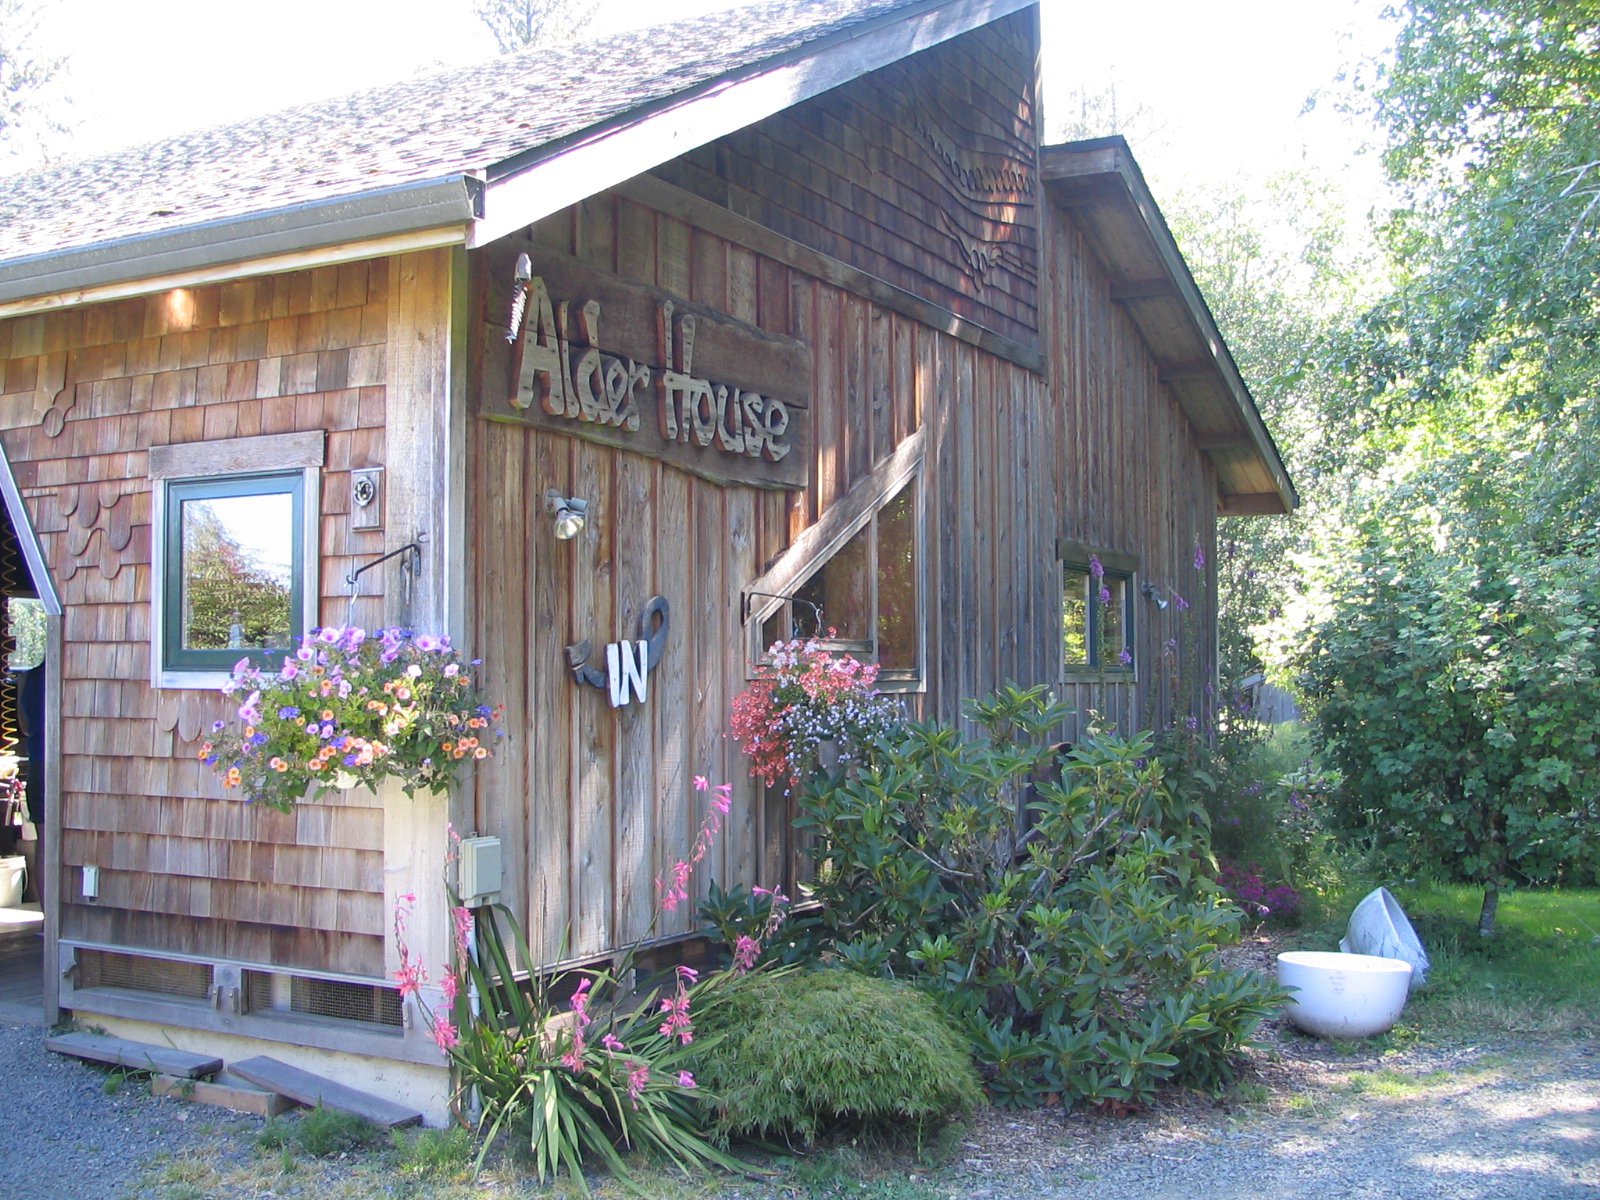 exterior of cottage style building with lettering for Alder House near the entrance